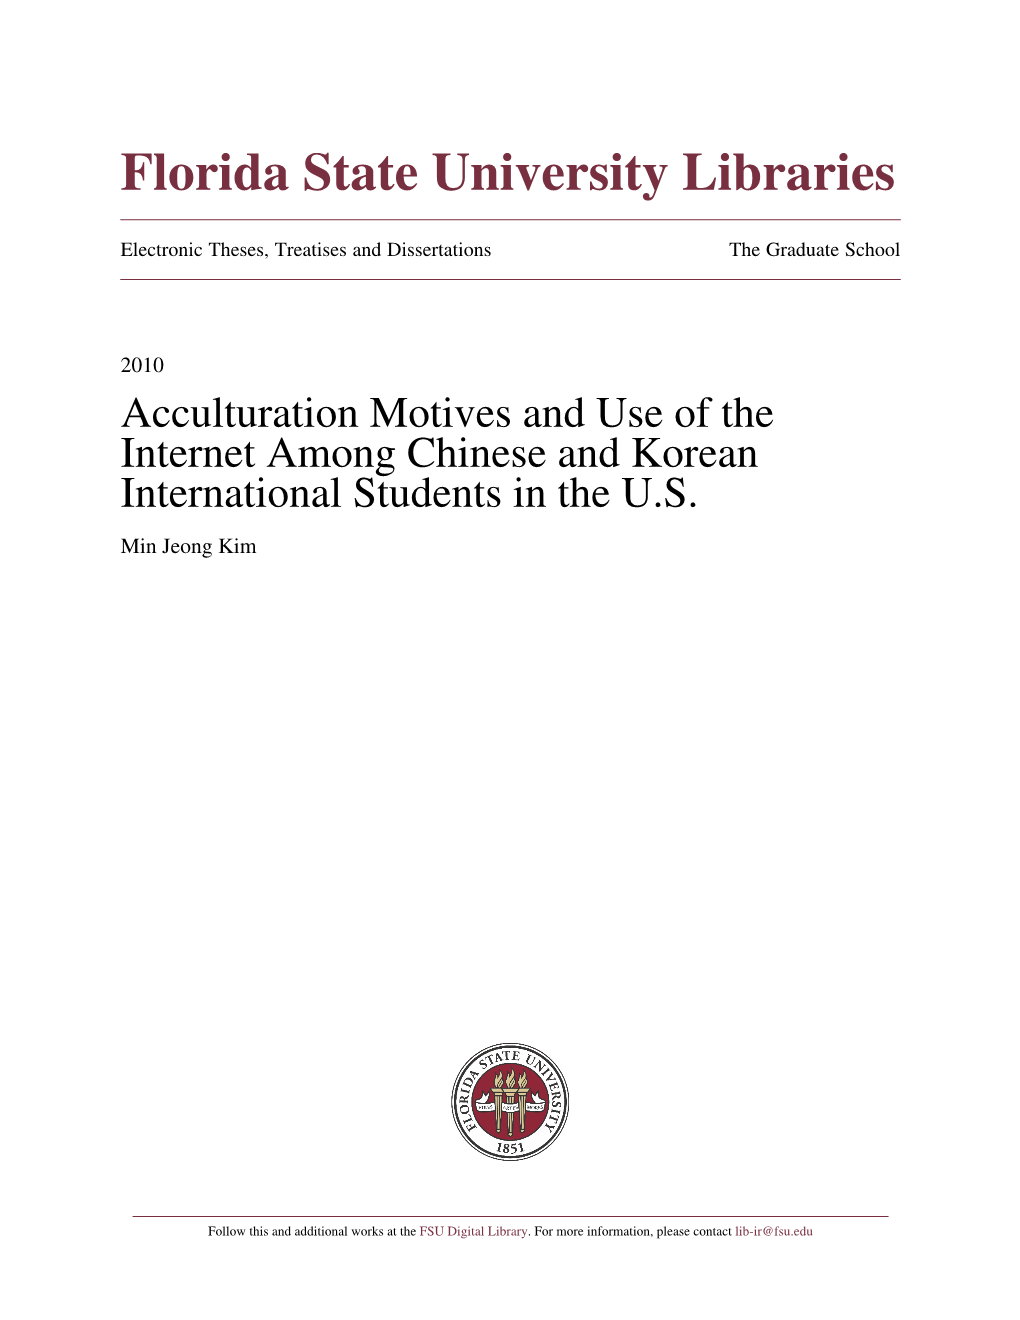 Acculturation Motives and Use of the Internet Among Chinese and Korean International Students in the U.S. Min Jeong Kim